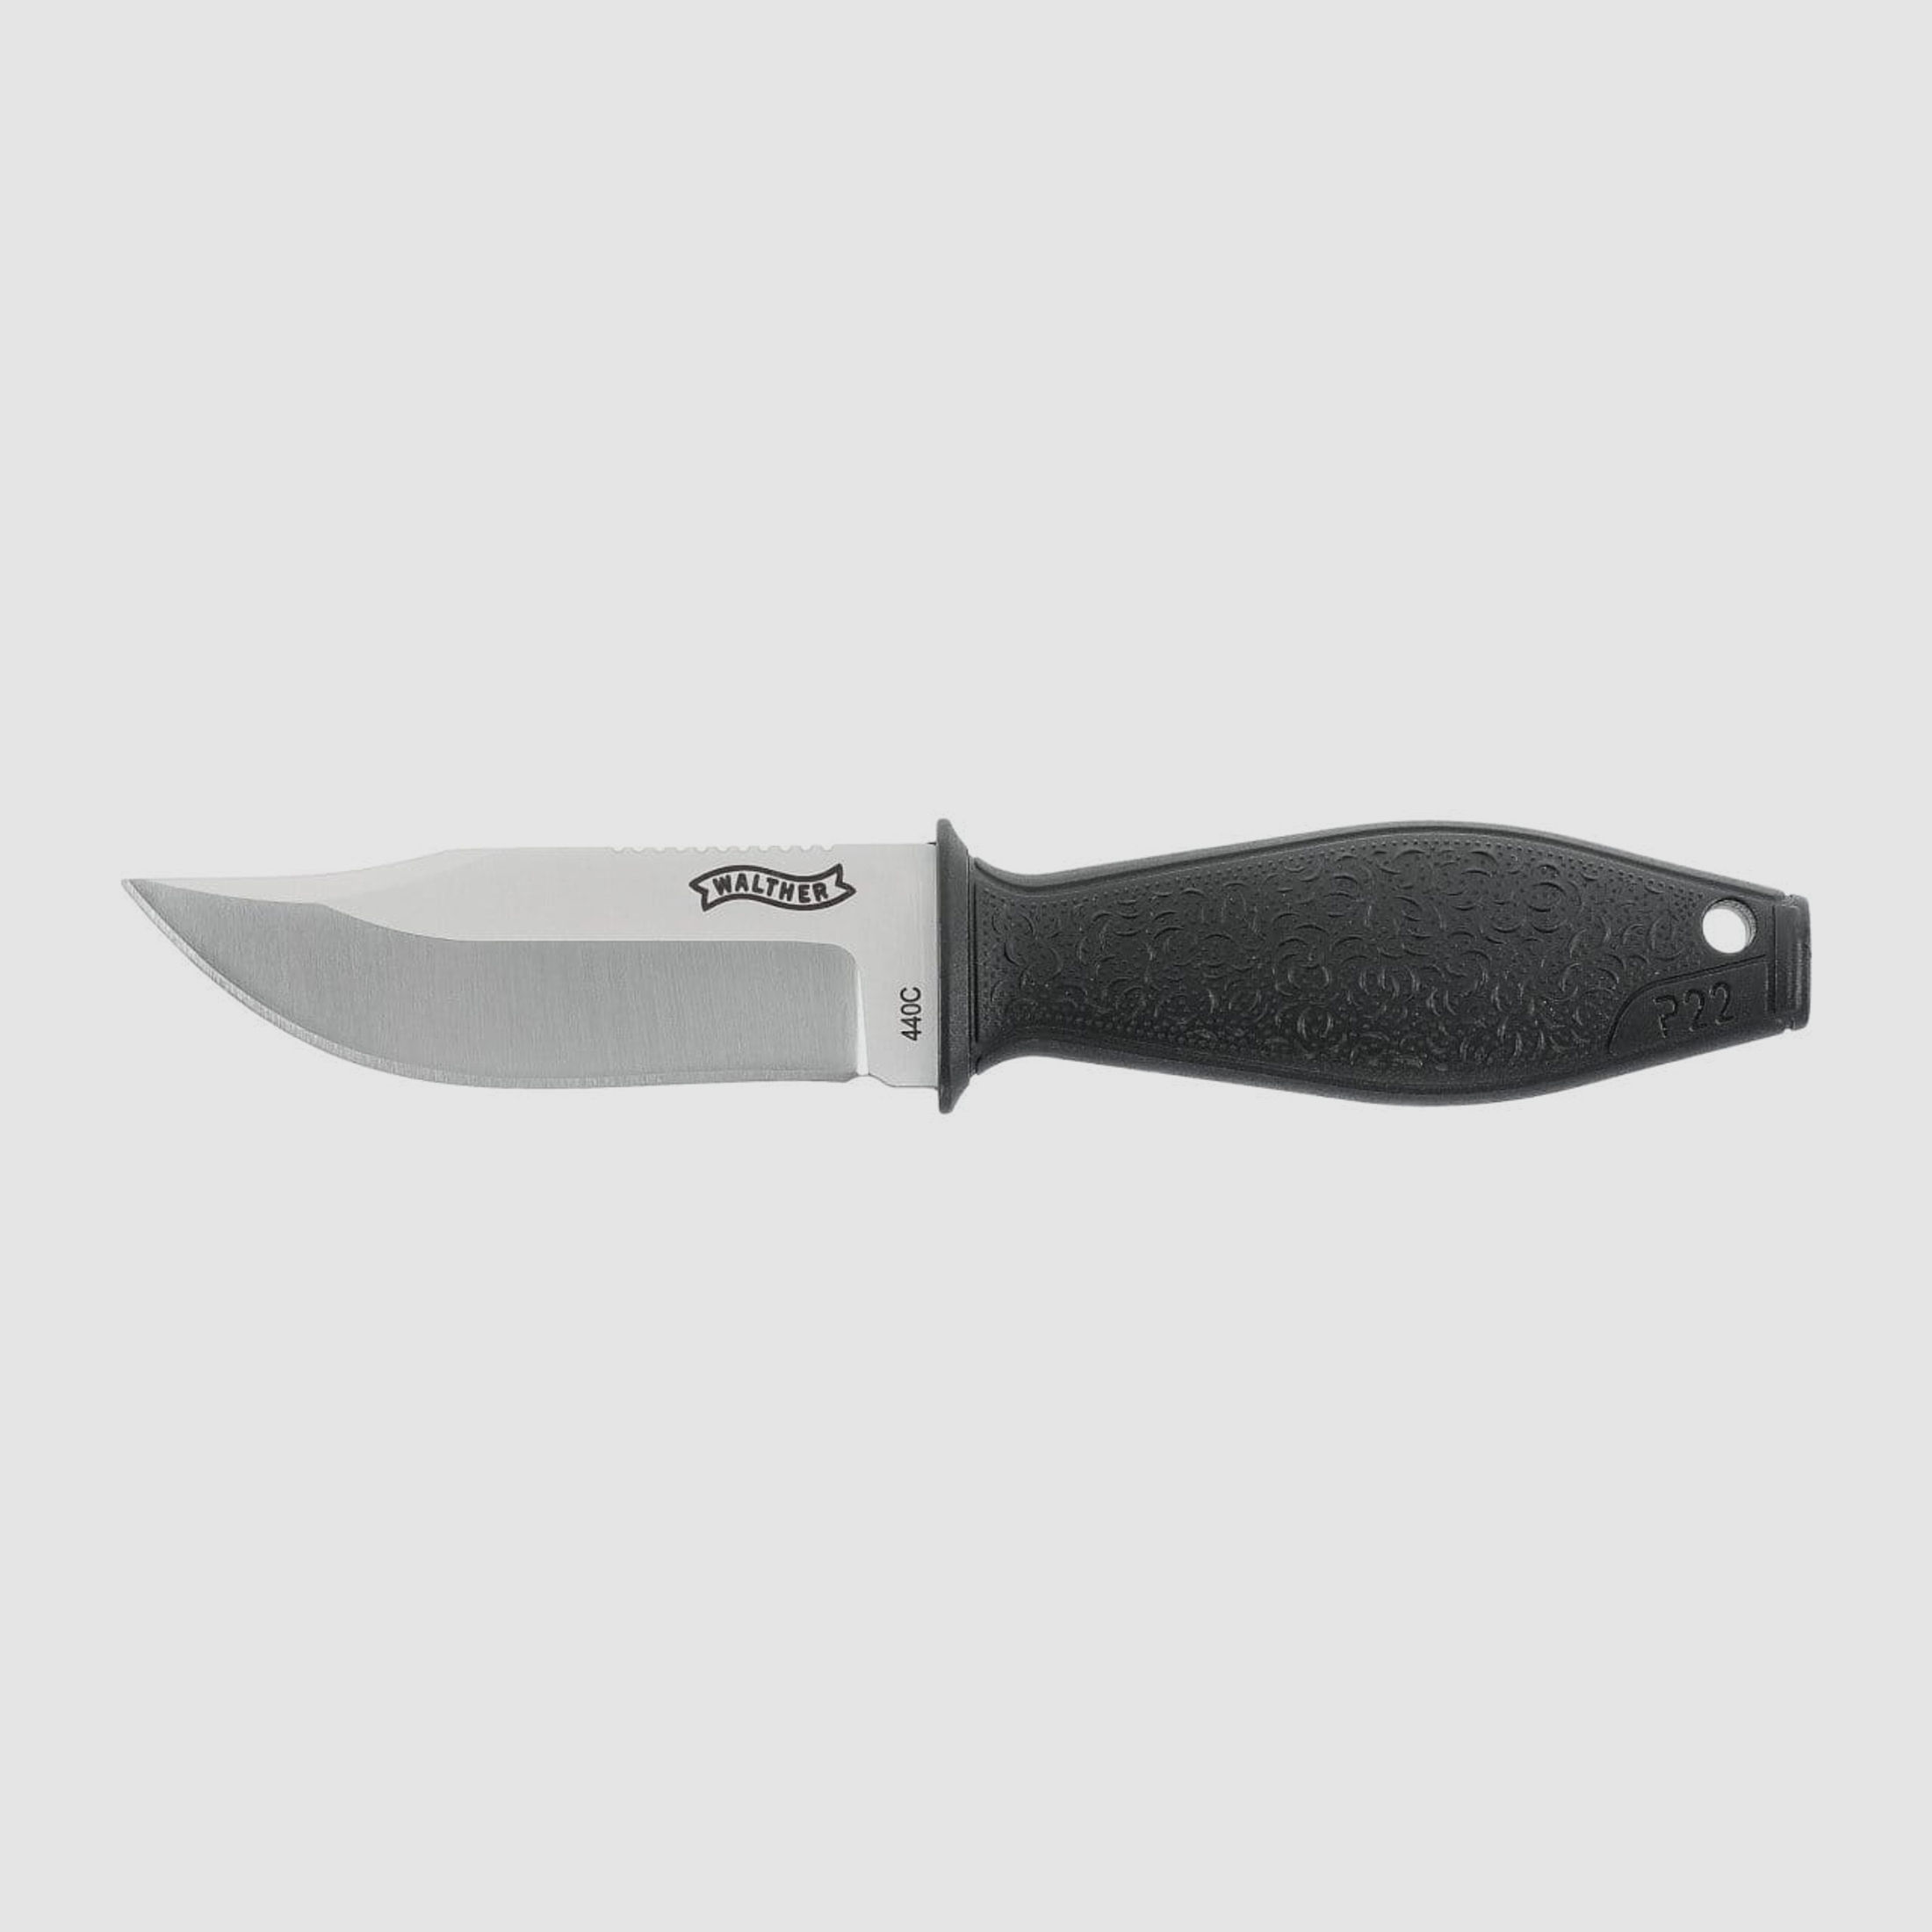 Walther P22 BSK Bowie Strap Knife